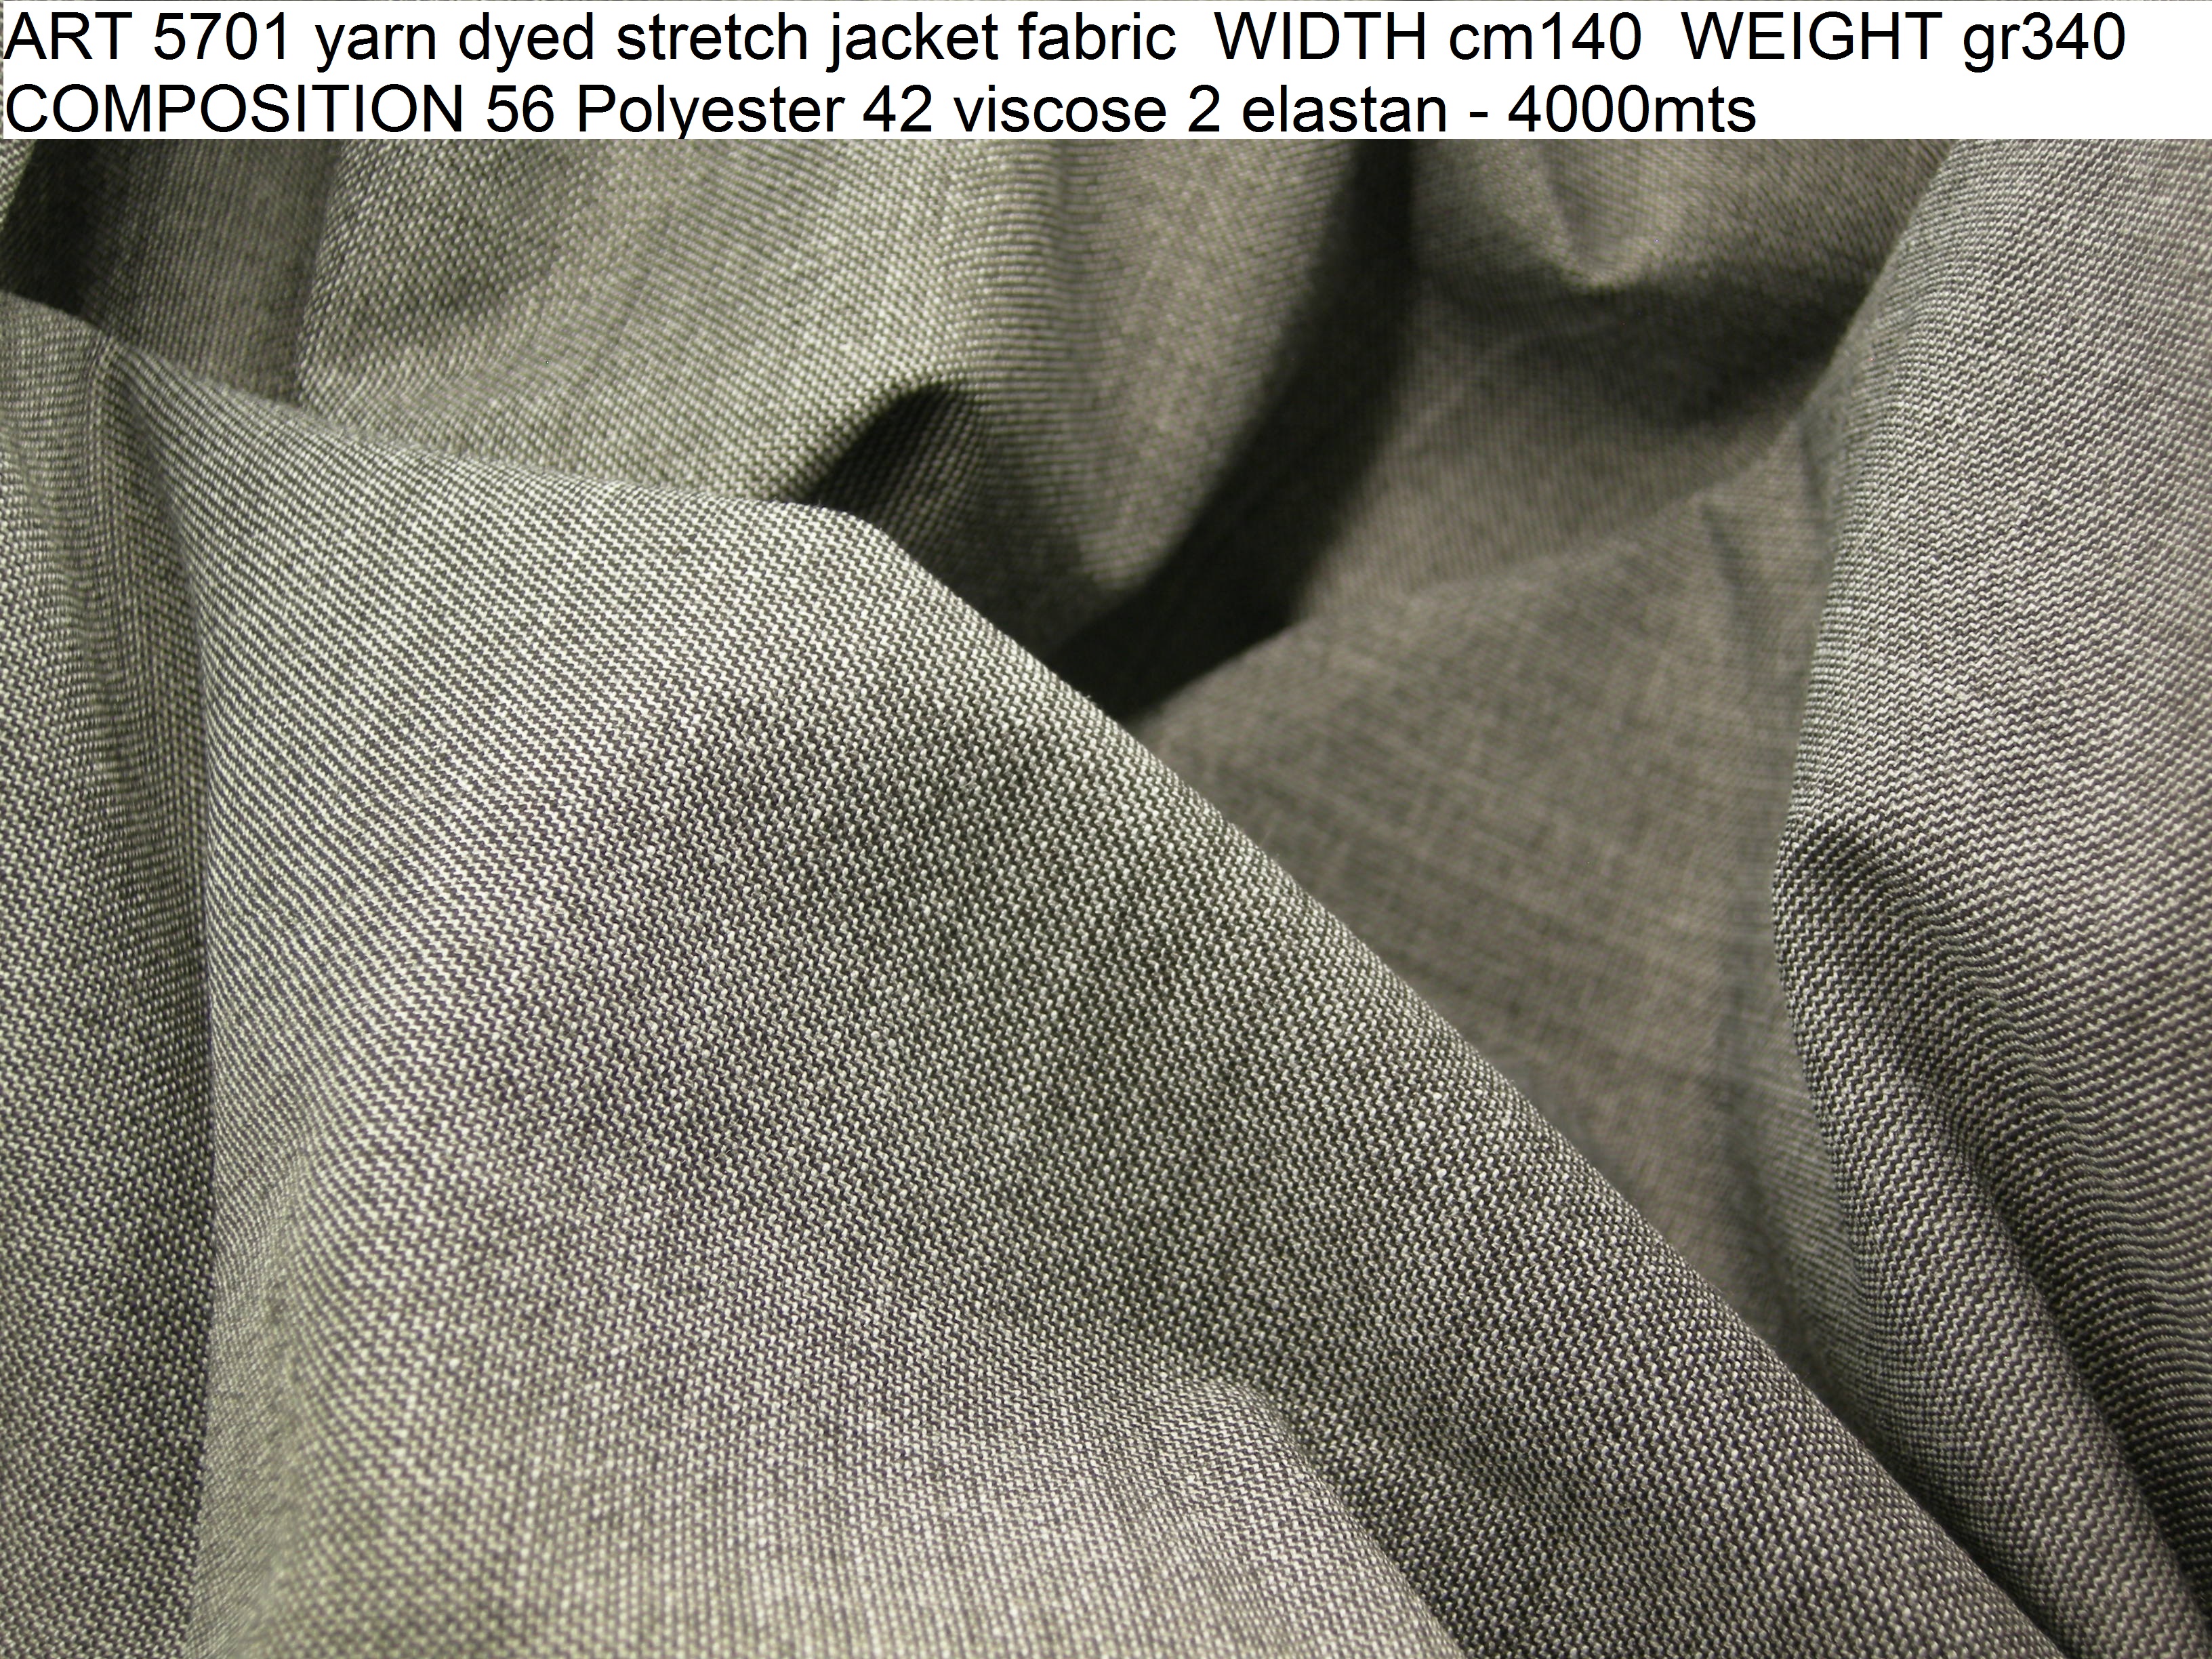 ART 5701 yarn dyed stretch jacket fabric WIDTH cm140 WEIGHT gr340 COMPOSITION 56 Polyester 42 viscose 2 elastan - 4000mts